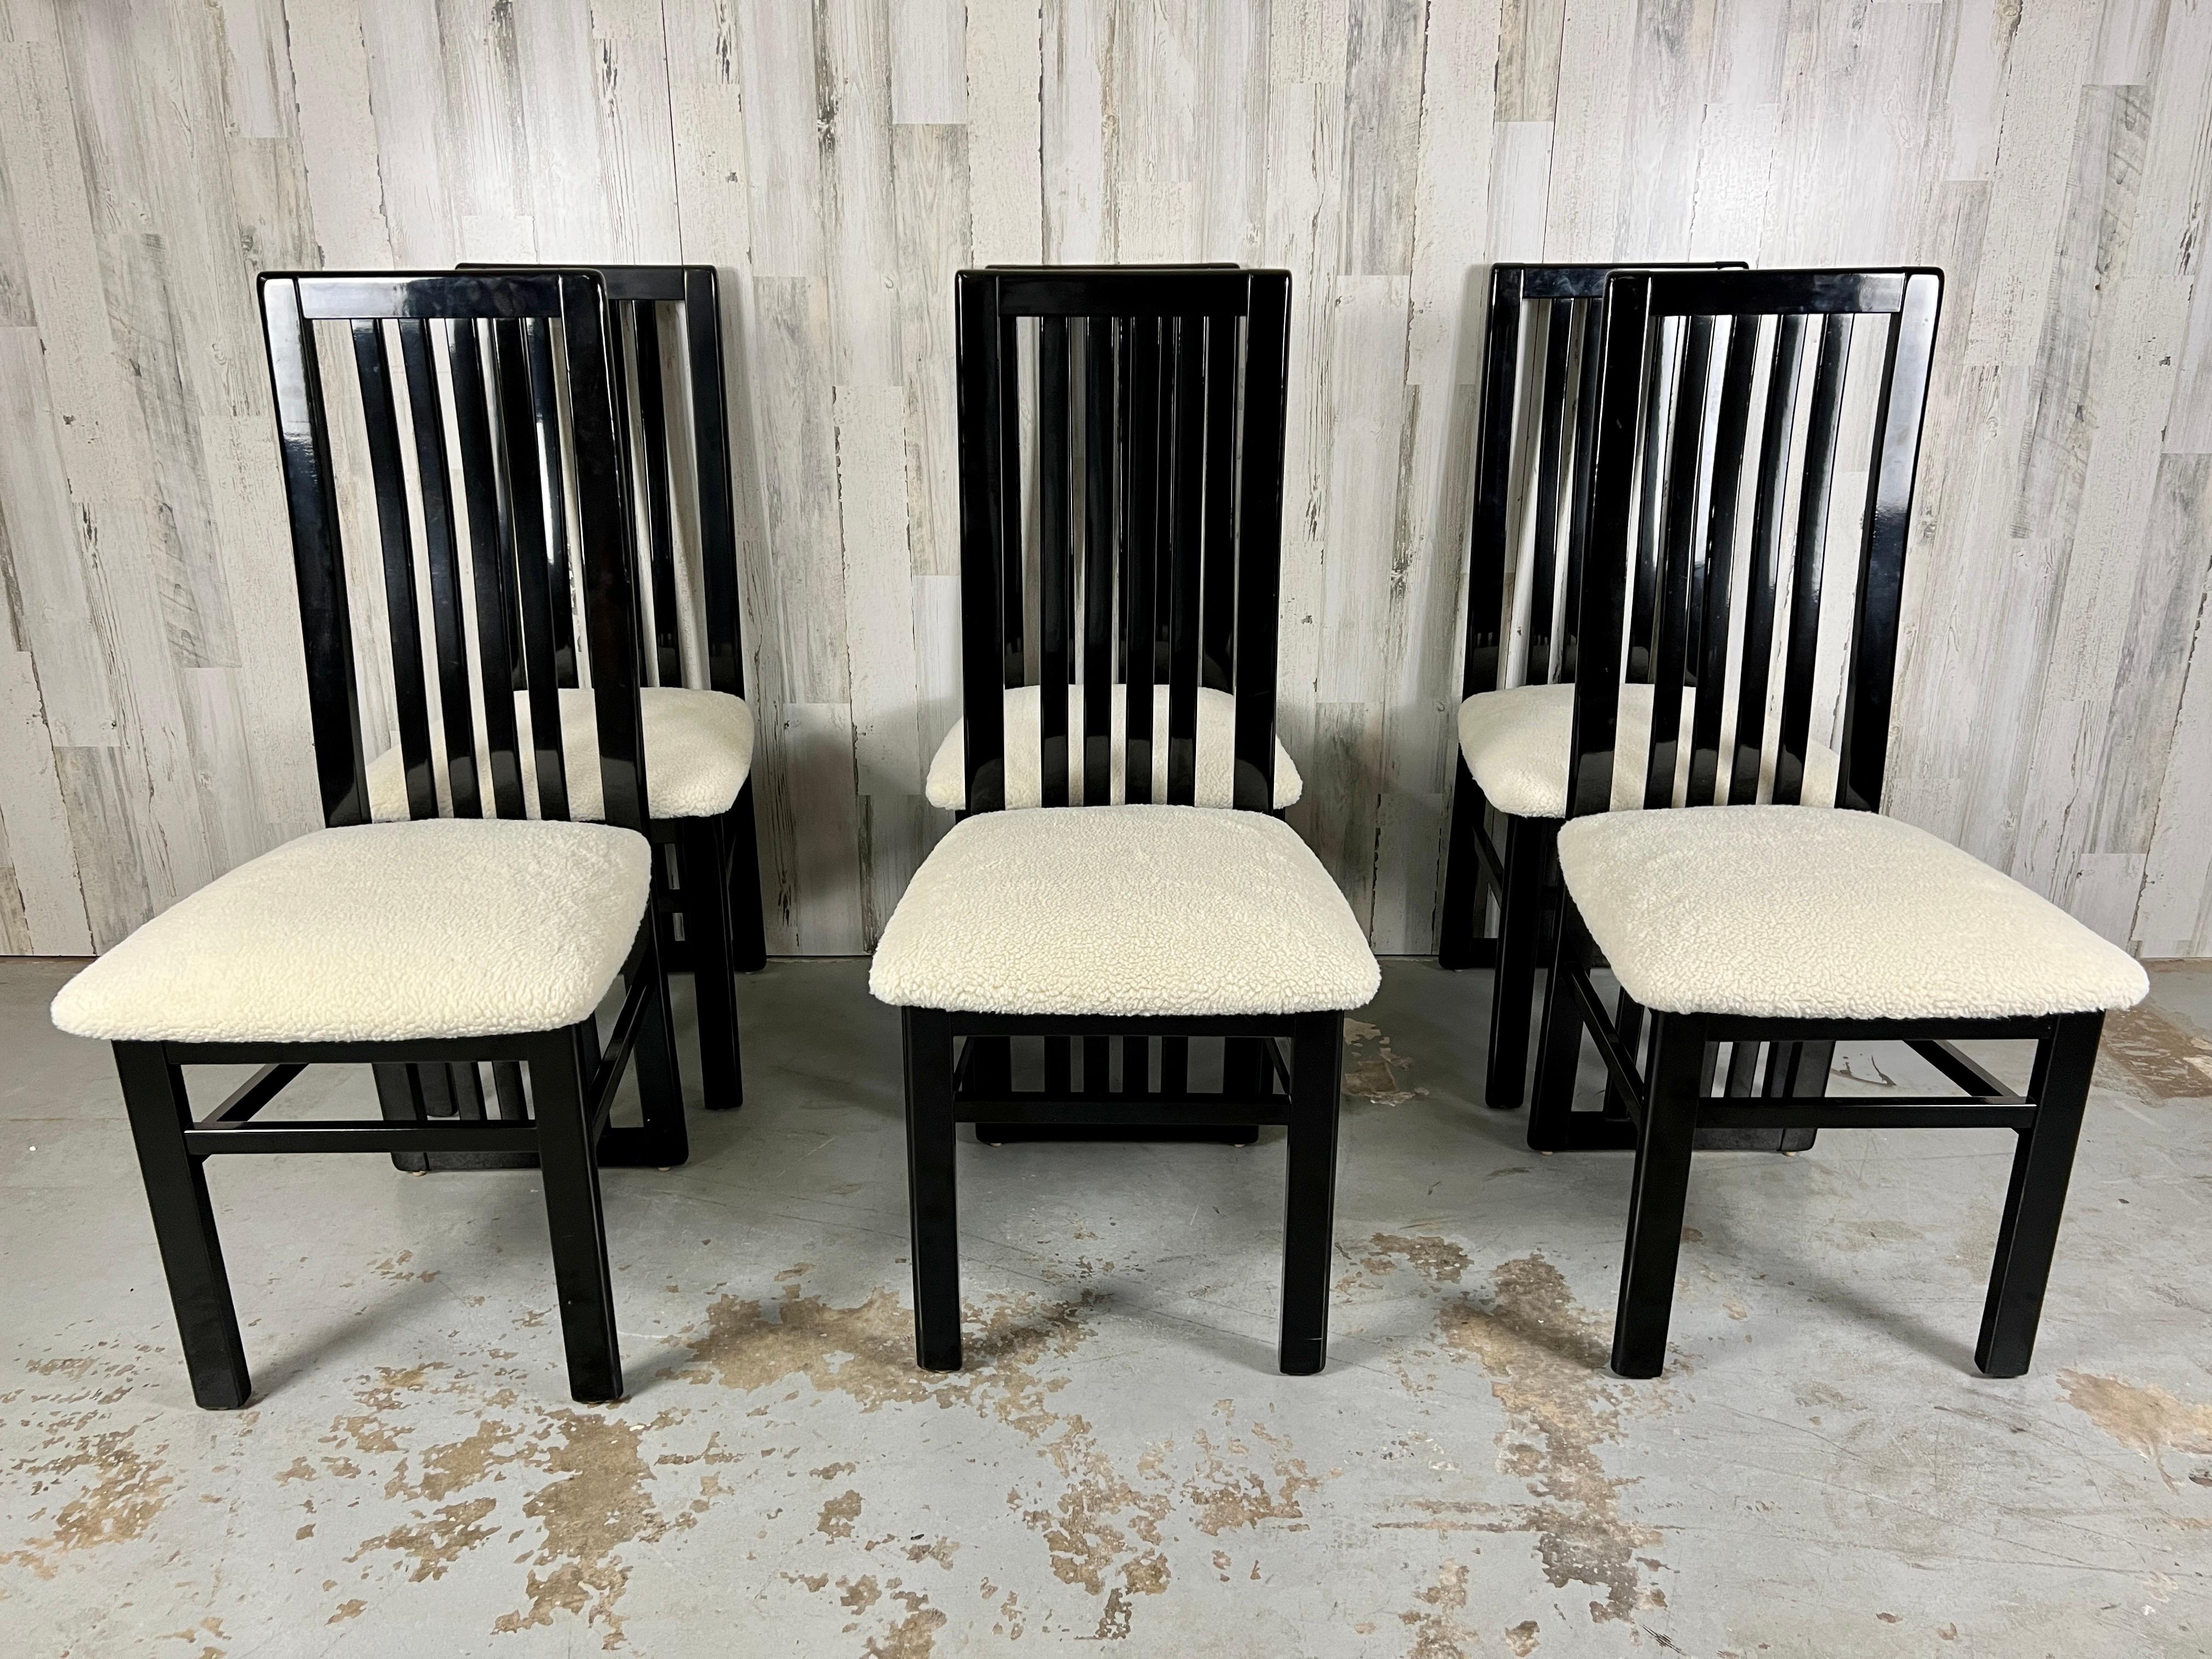 Italian Black Lacquer Dining Chairs by S.P.a Tonon 1